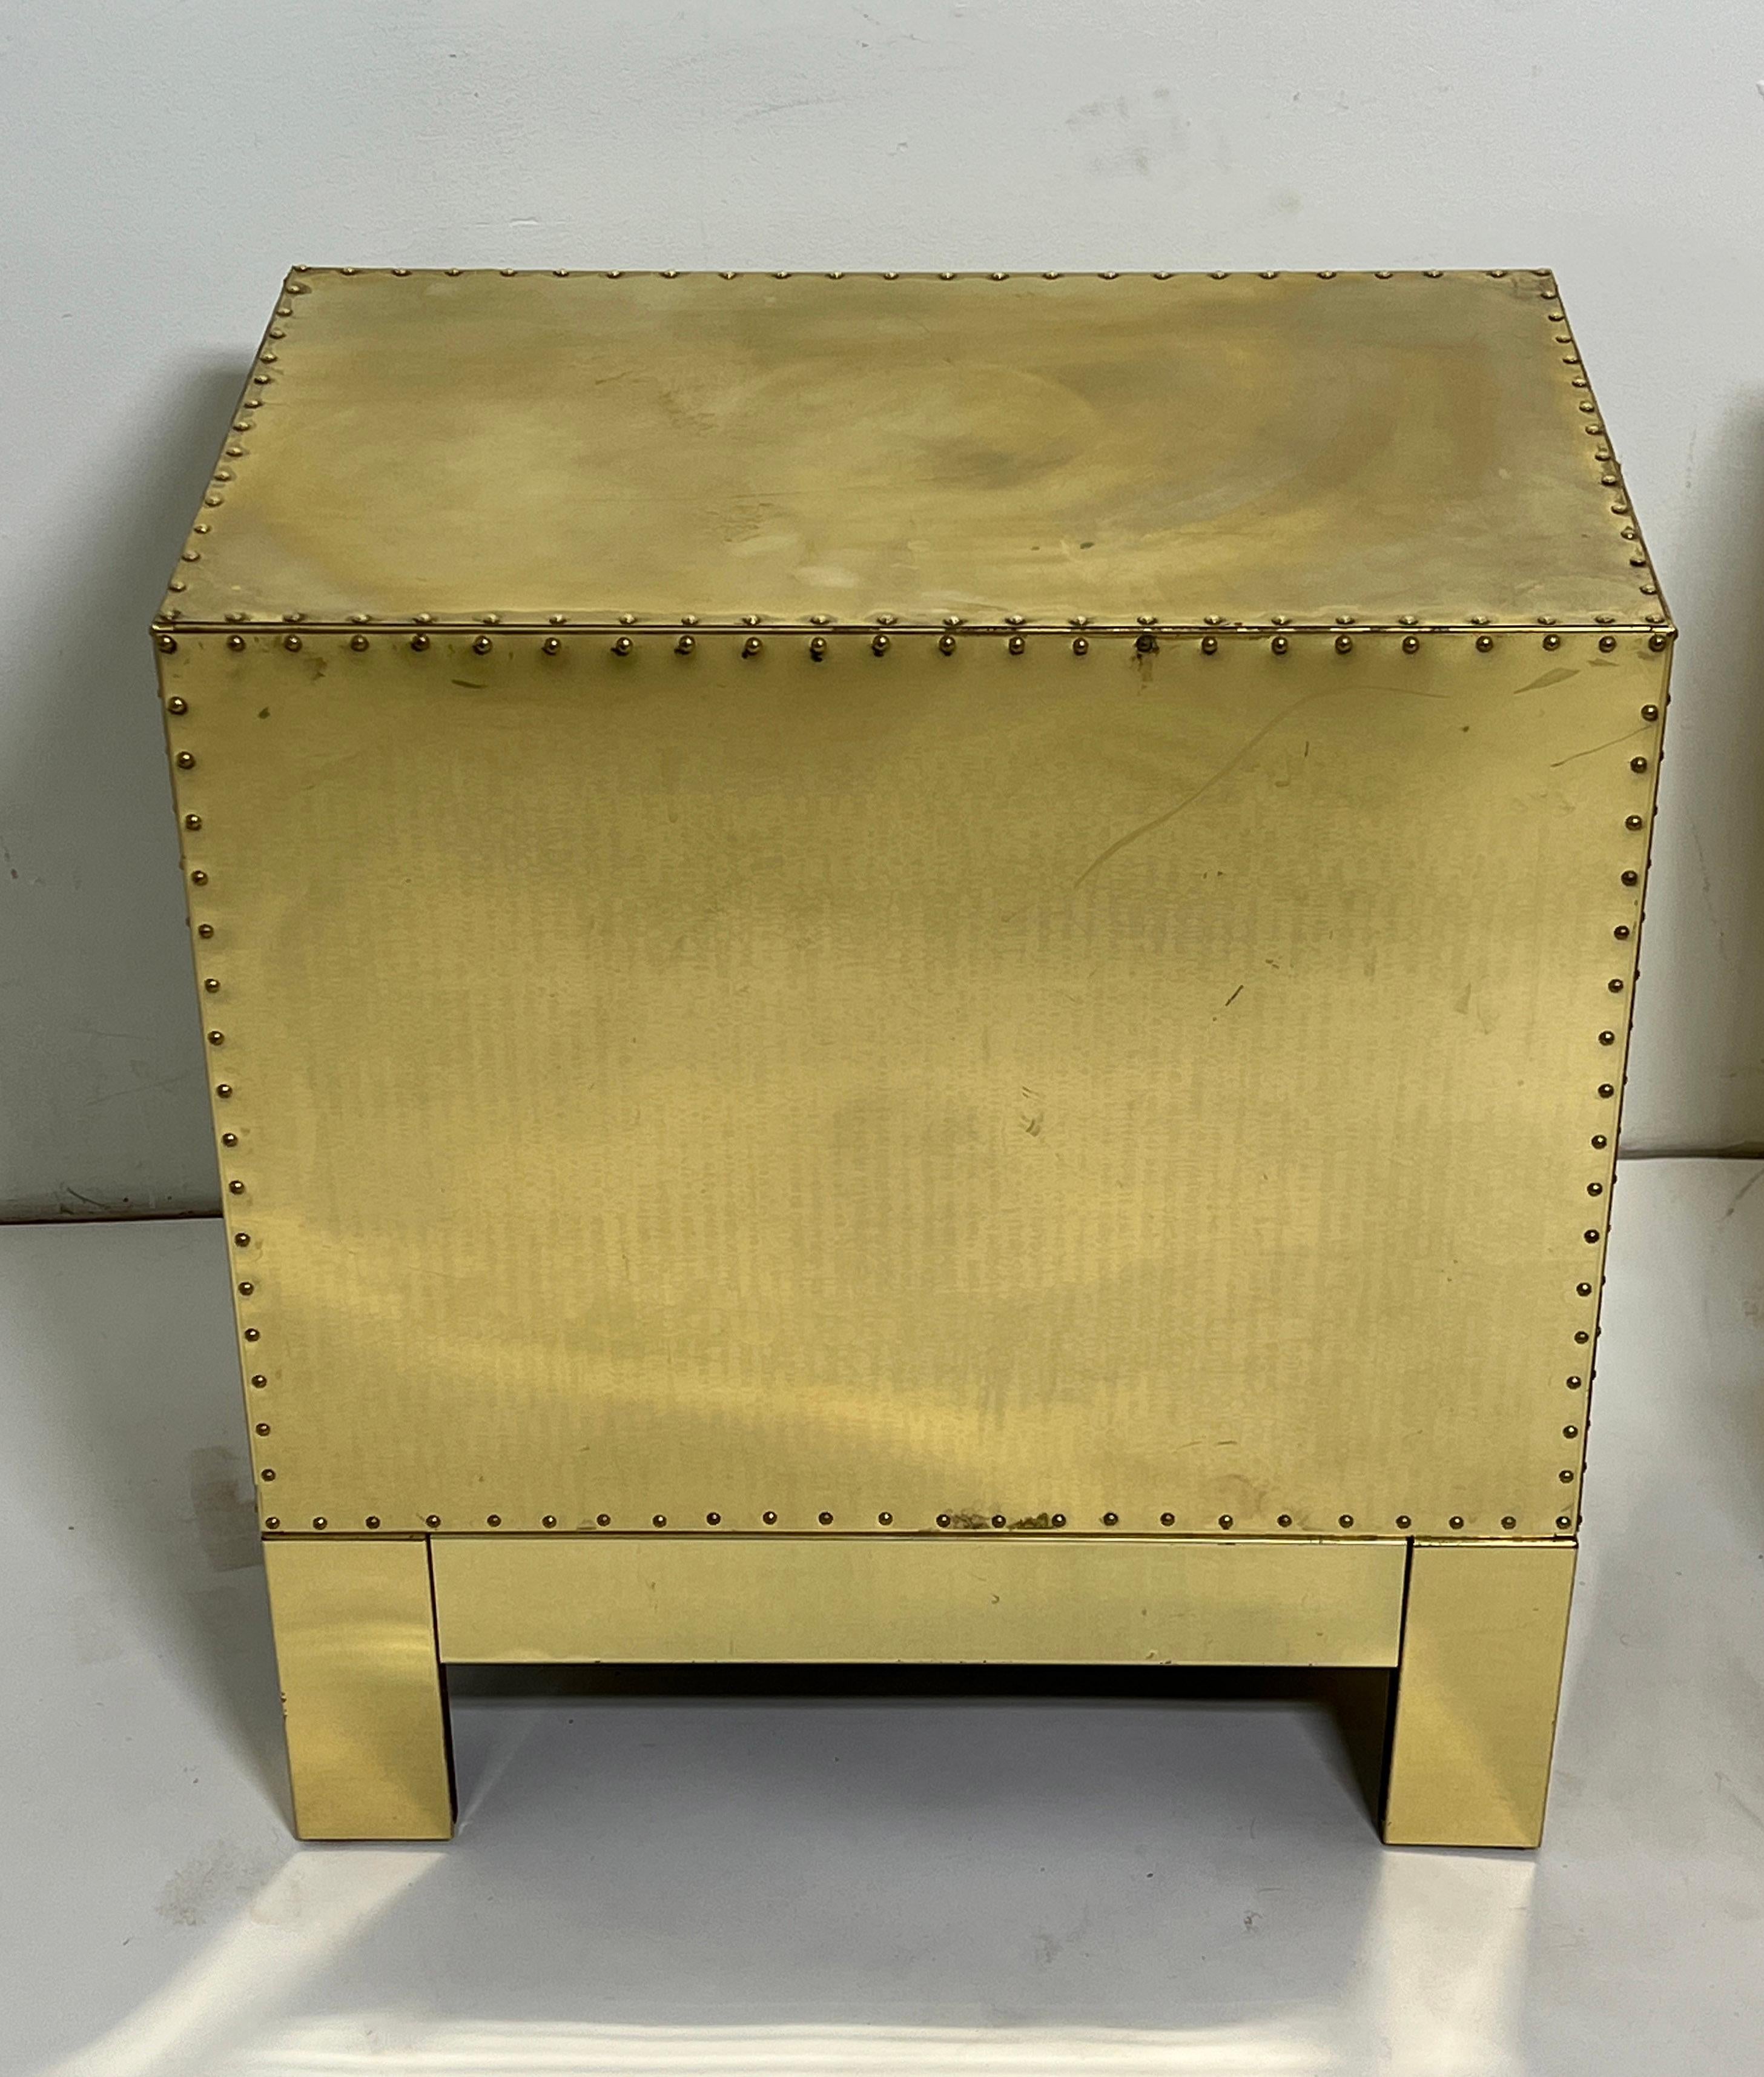 Pair of Three Drawer Brass Clad Chests in Manner of Sarreid, Circa 1970s For Sale 5